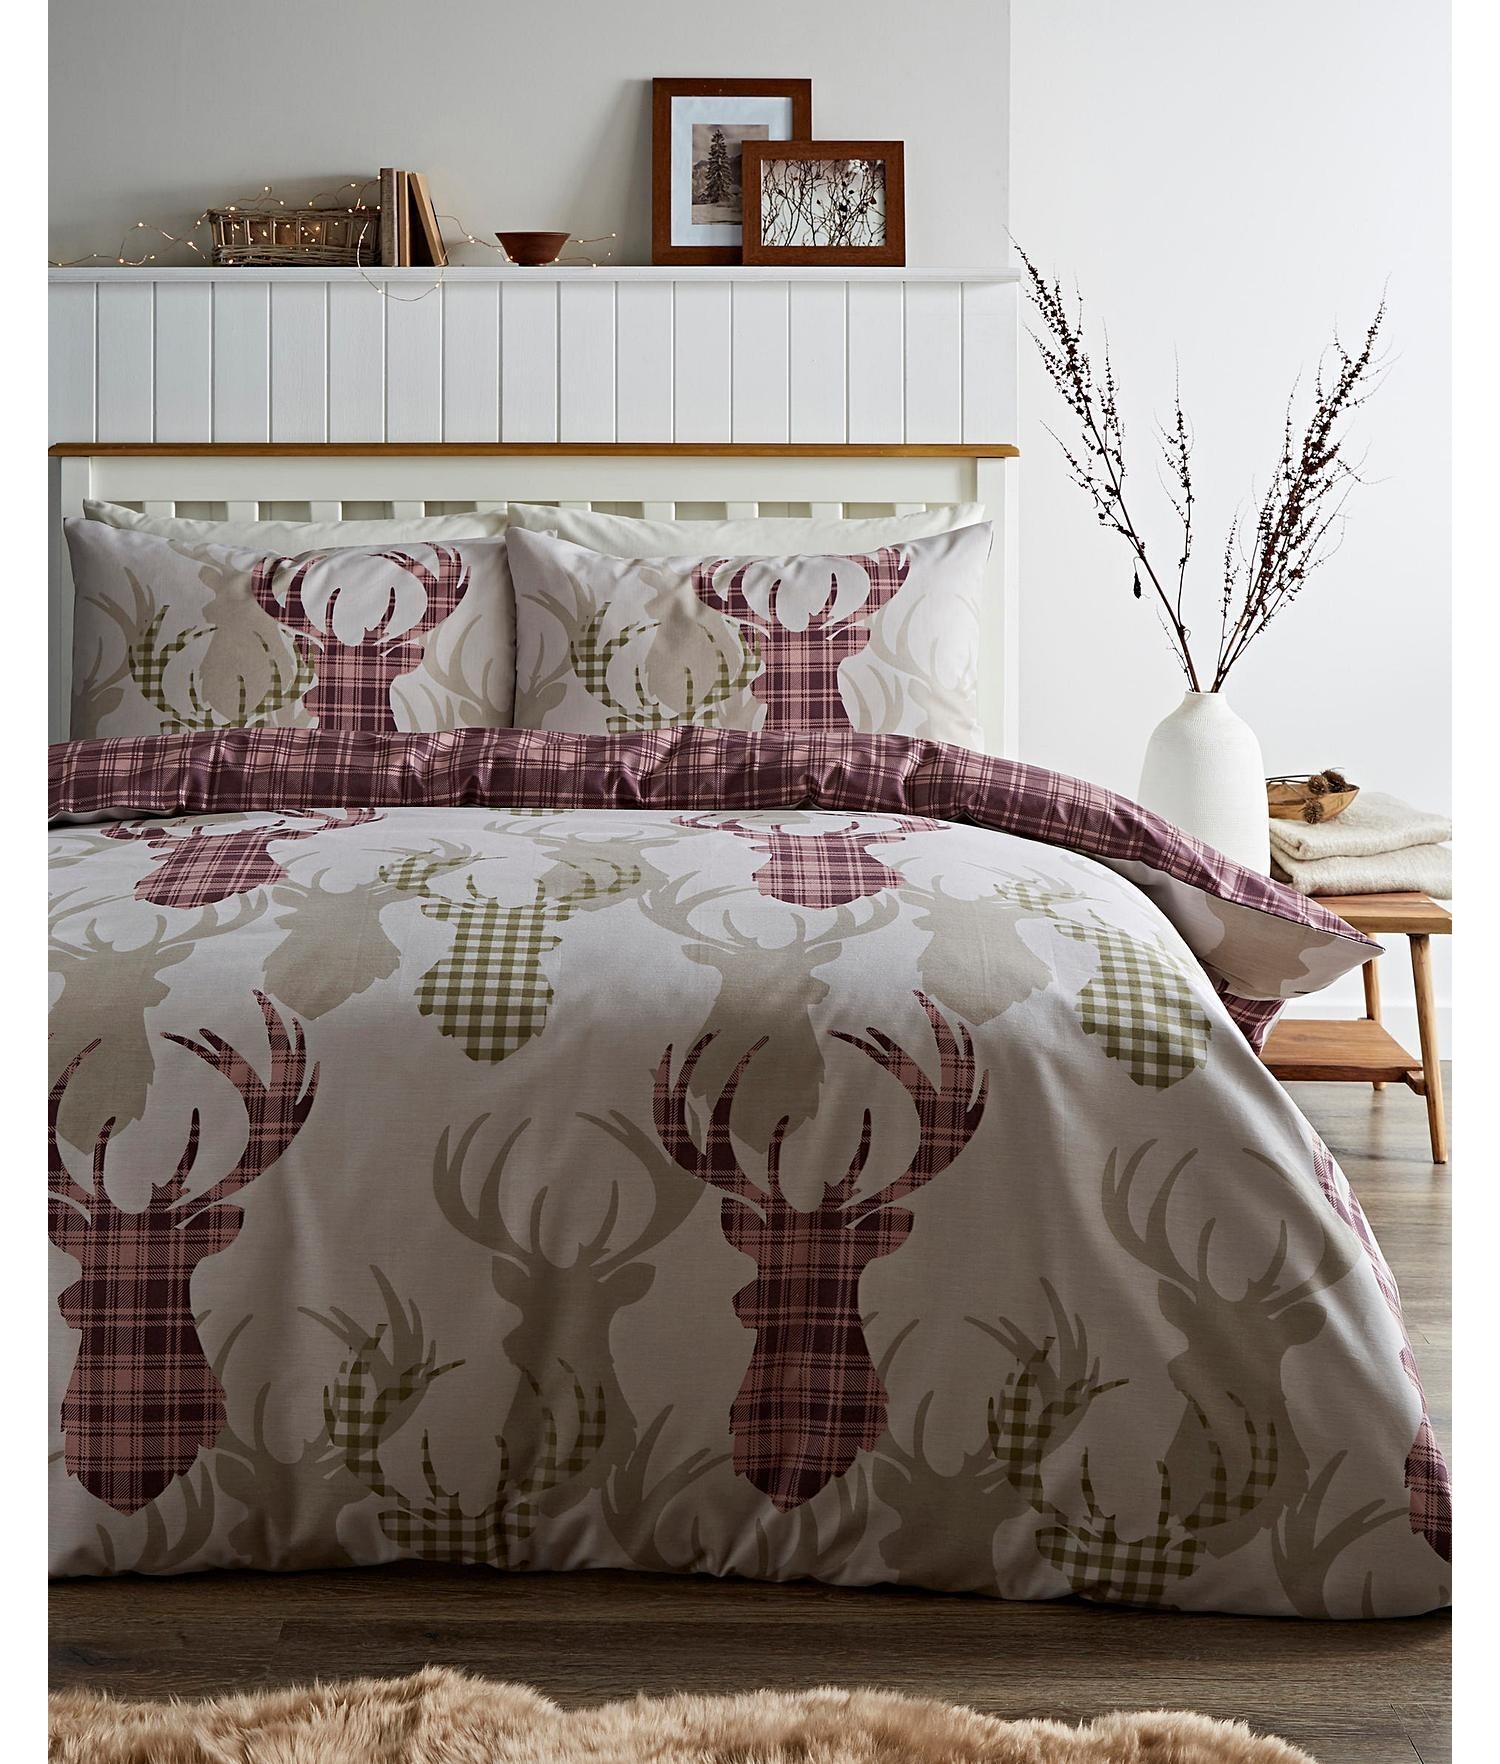 Check Stag Tartan Deer Antlers Bedding duvet cover set with matching pillowcase 